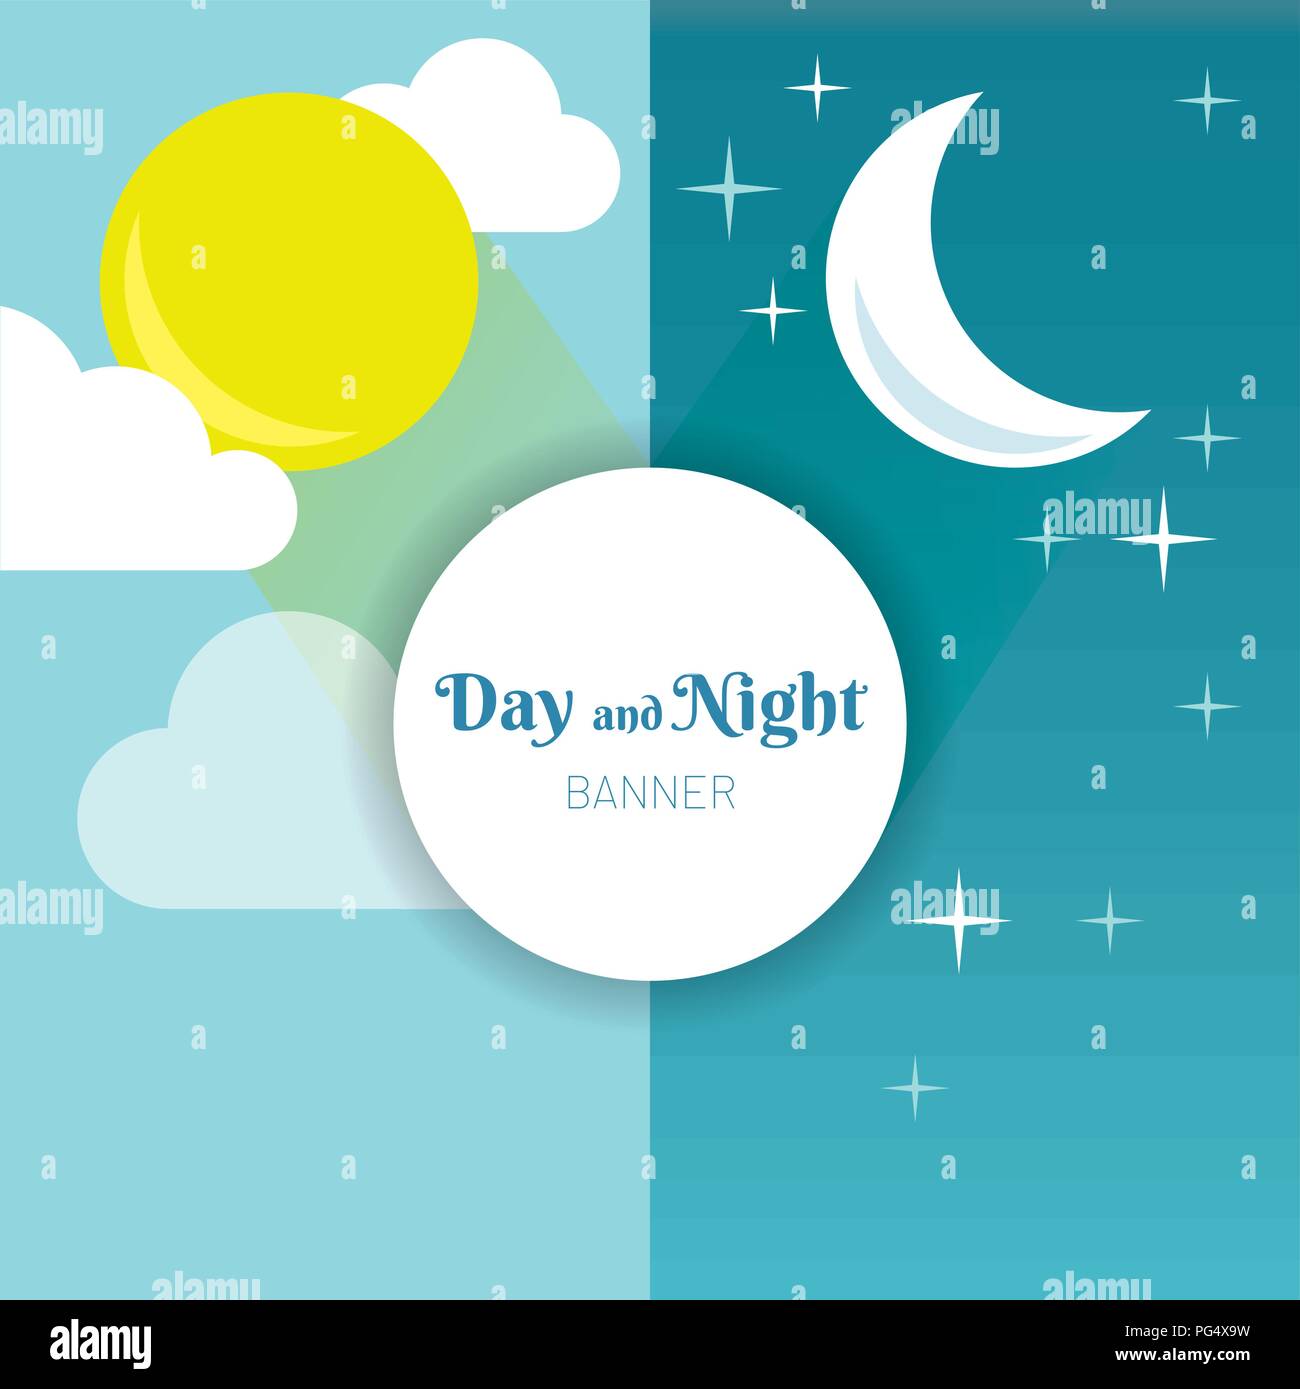 Day and Night layout. Sun, moon, stars and clouds banner. Weather background. Forecast concept banner. Daytime poster. Stock Vector